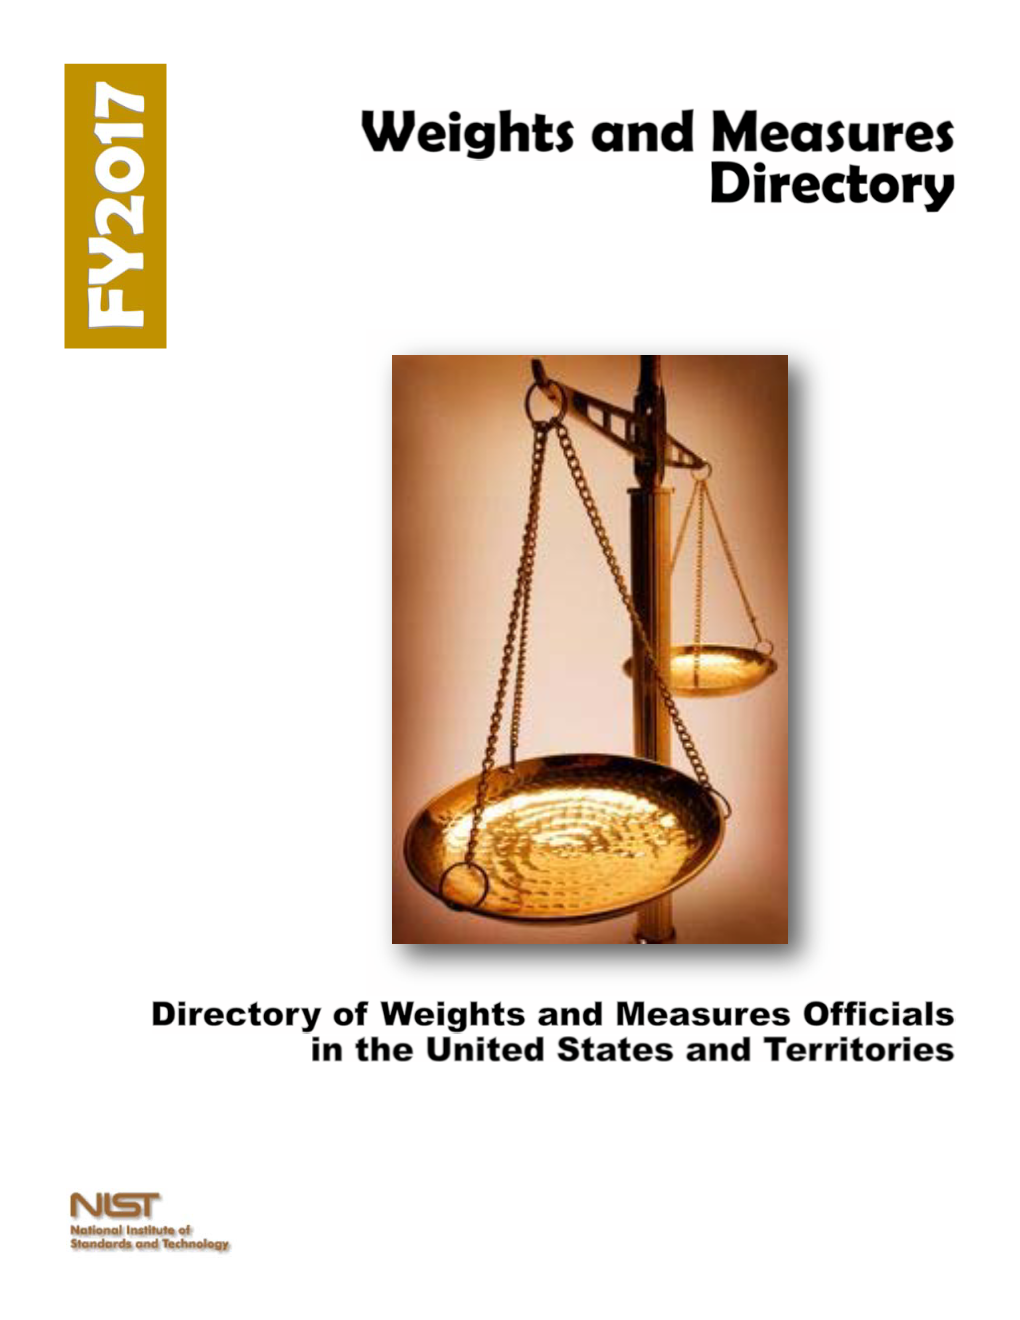 U.S. Weights and Measures Directory